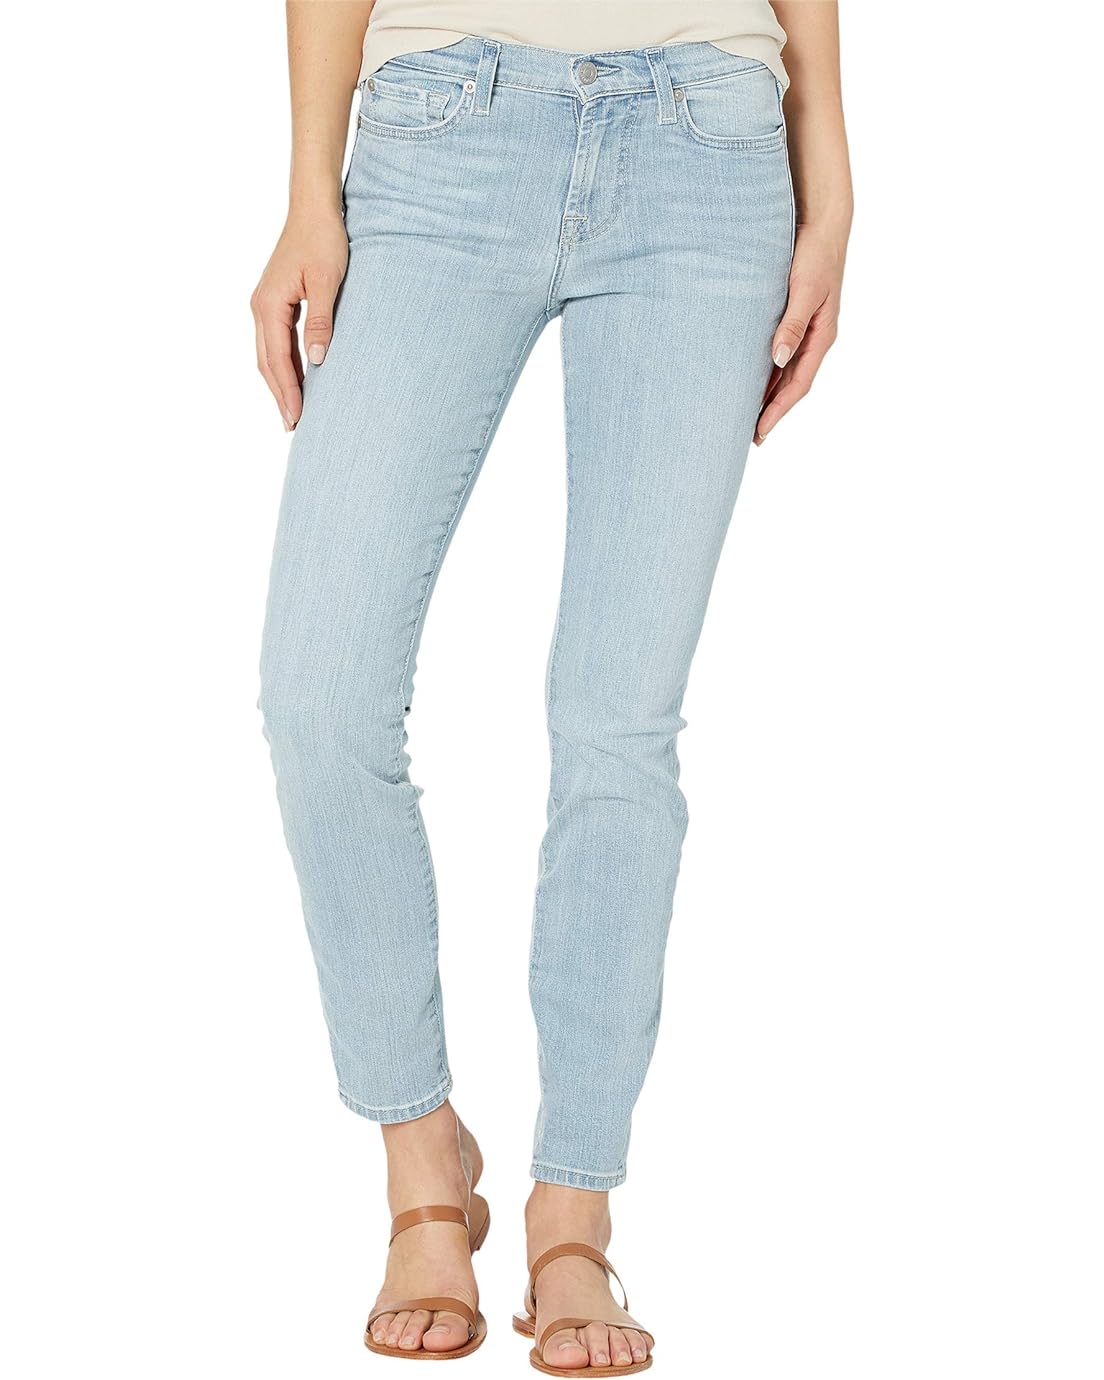 7 For All Mankind The Skinny in Light Winona